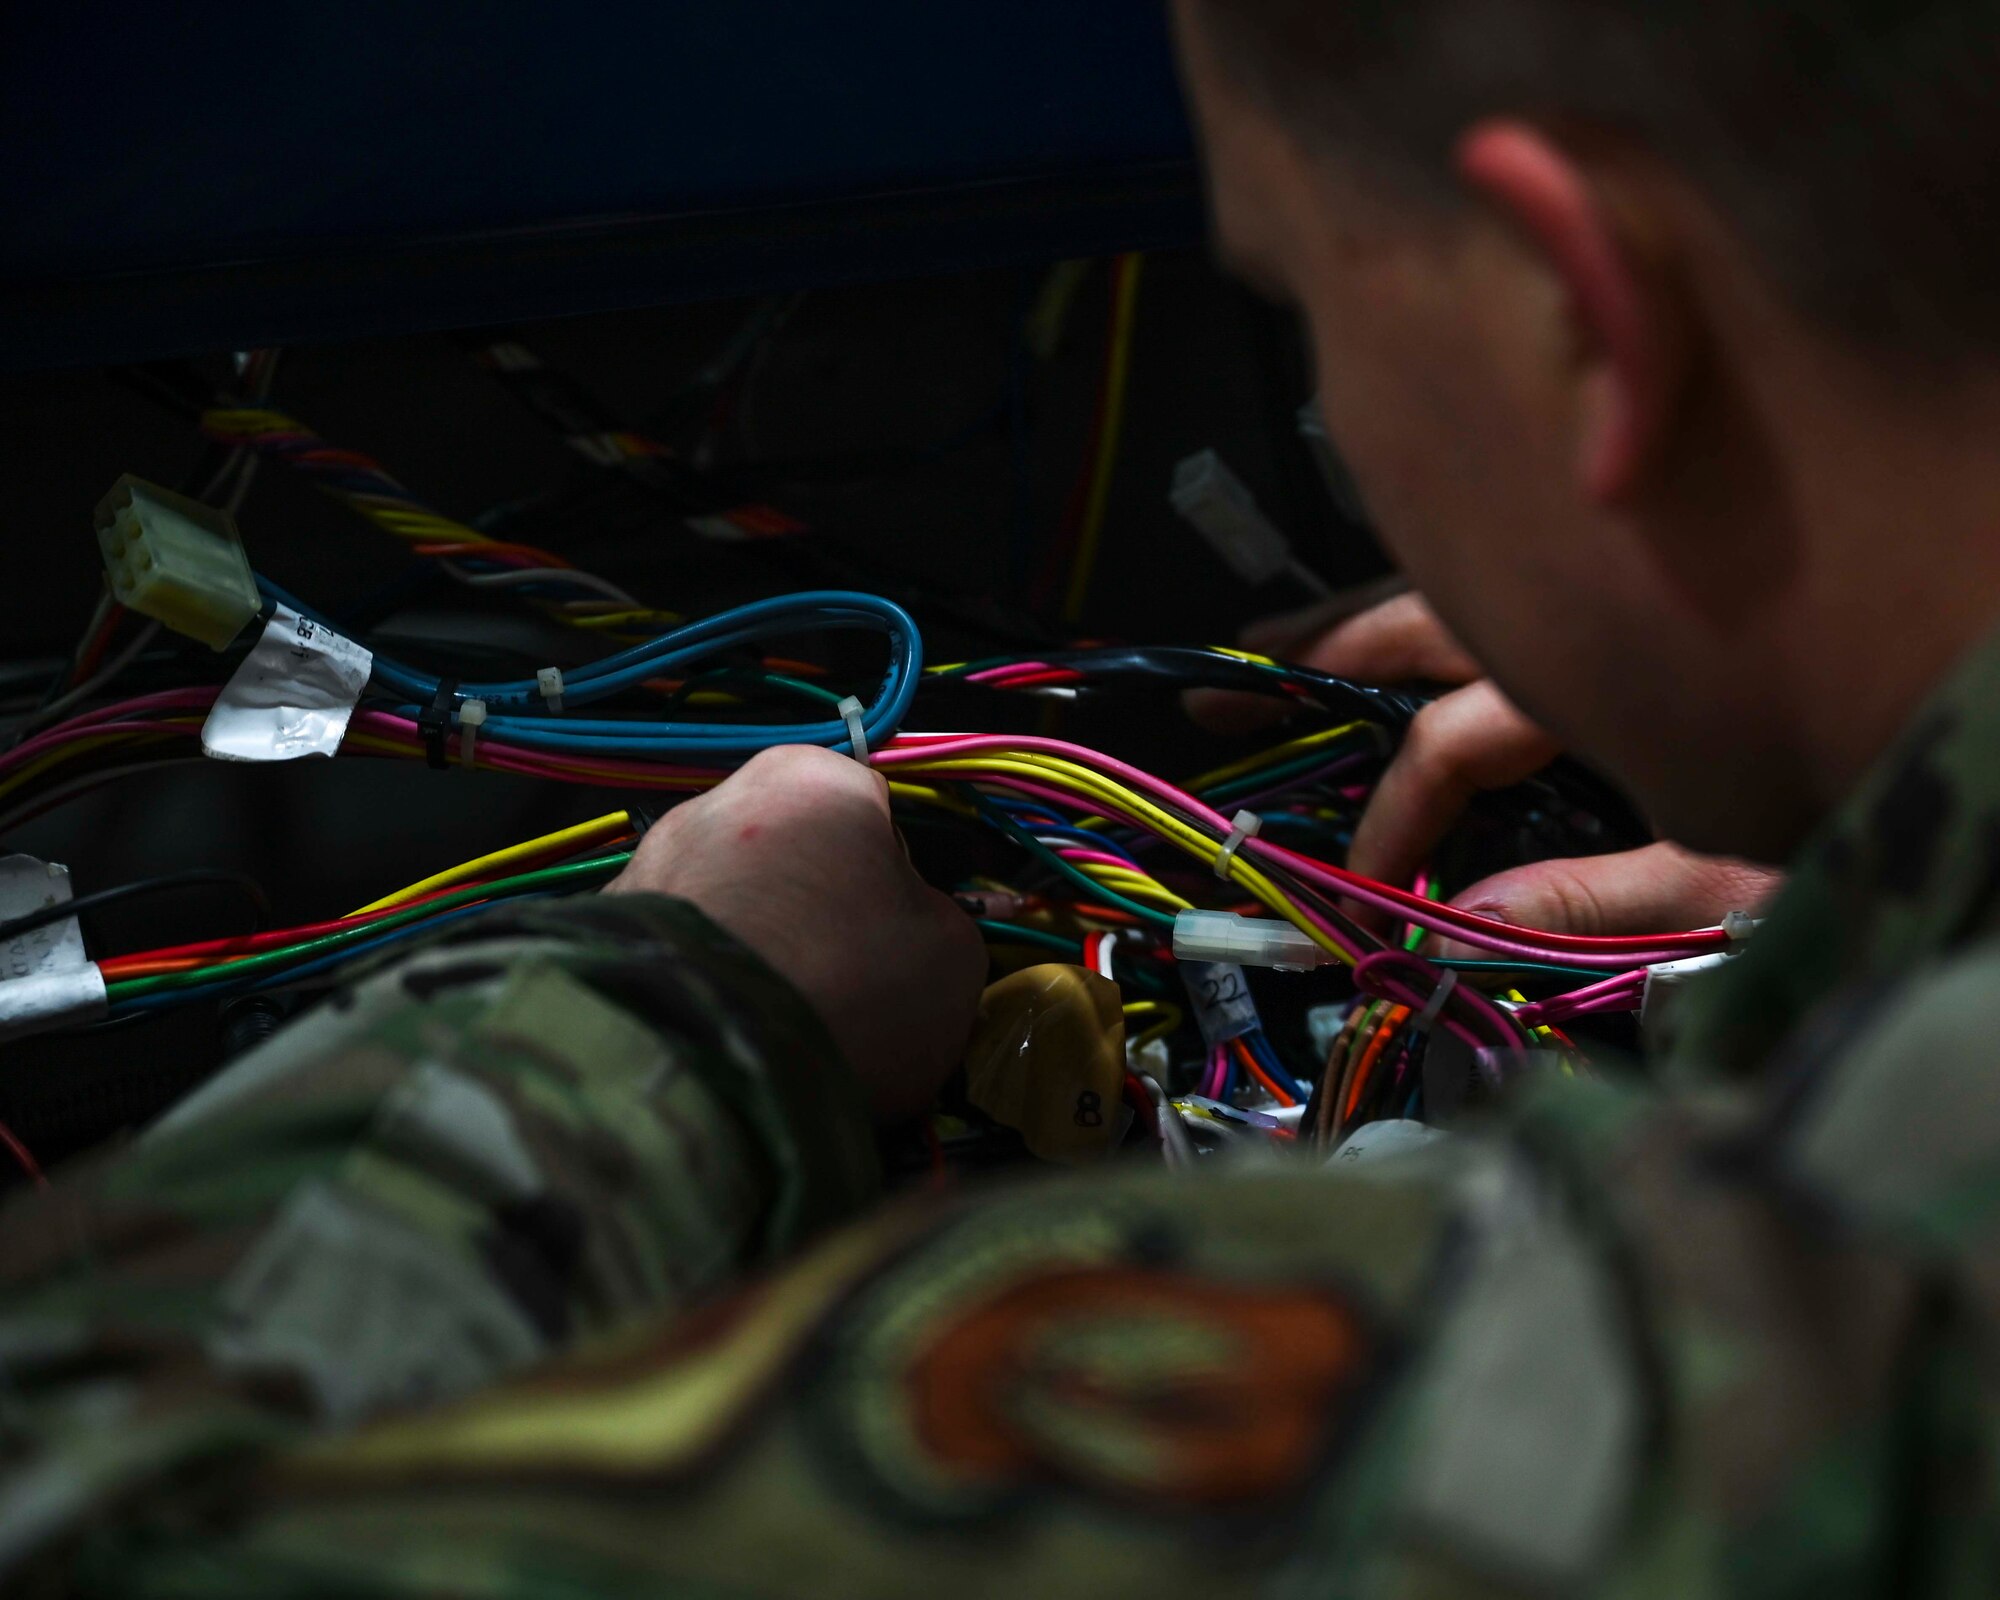 U.S. Air Force Senior Airman Dylan Colt, 100th Logistics Readiness Squadron vehicle maintenance journeyman (right), Airman 1st Class Cameron French, 100th Security Forces response member (left), and Senior Airman Michael Pingitore (middle), base defense operations center controller, discuss a headlight system defect on a security forces patrol vehicle assigned to the 100th LRS, Royal Air Force Mildenhall, England, Feb. 2, 2022. In order to keep patrol vehicles mission-ready, a functioning headlight system is necessary to  challenge a speeding or suspicious driver. (U.S. Air Force photo by Airman 1st Class Viviam Chiu)